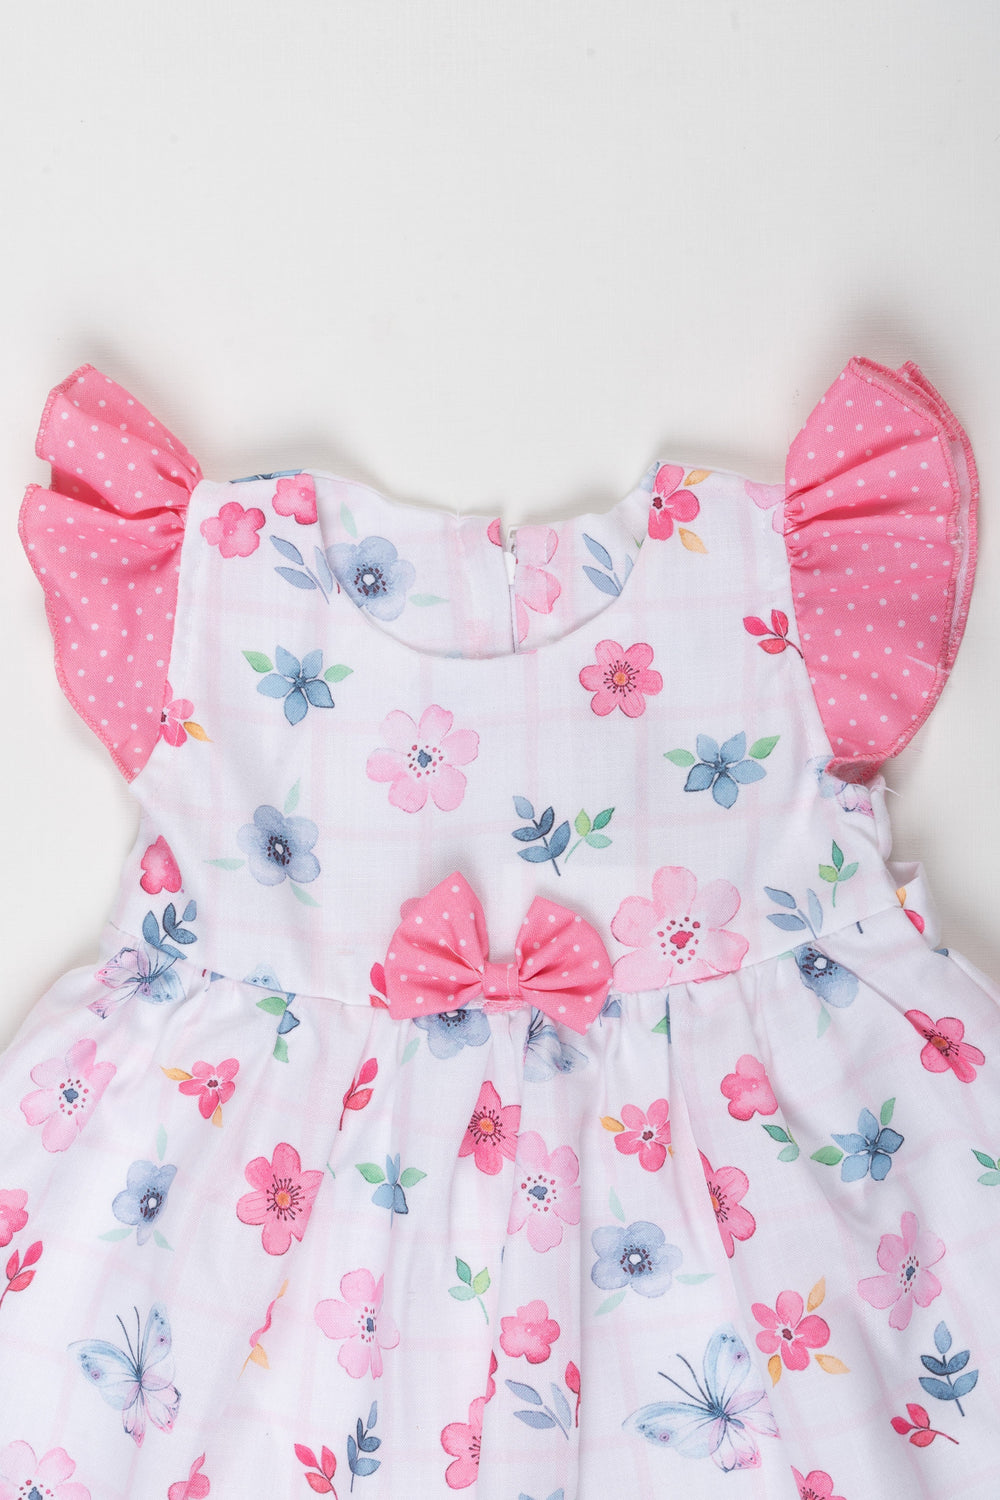 The Nesavu Baby Cotton Frocks Charming Floral Infant Frock for Girls - Comfortable Summer Casual Wear Nesavu Buy Girls Pastel Floral Frock | Summer Ready Infant Dresses | The Nesavu